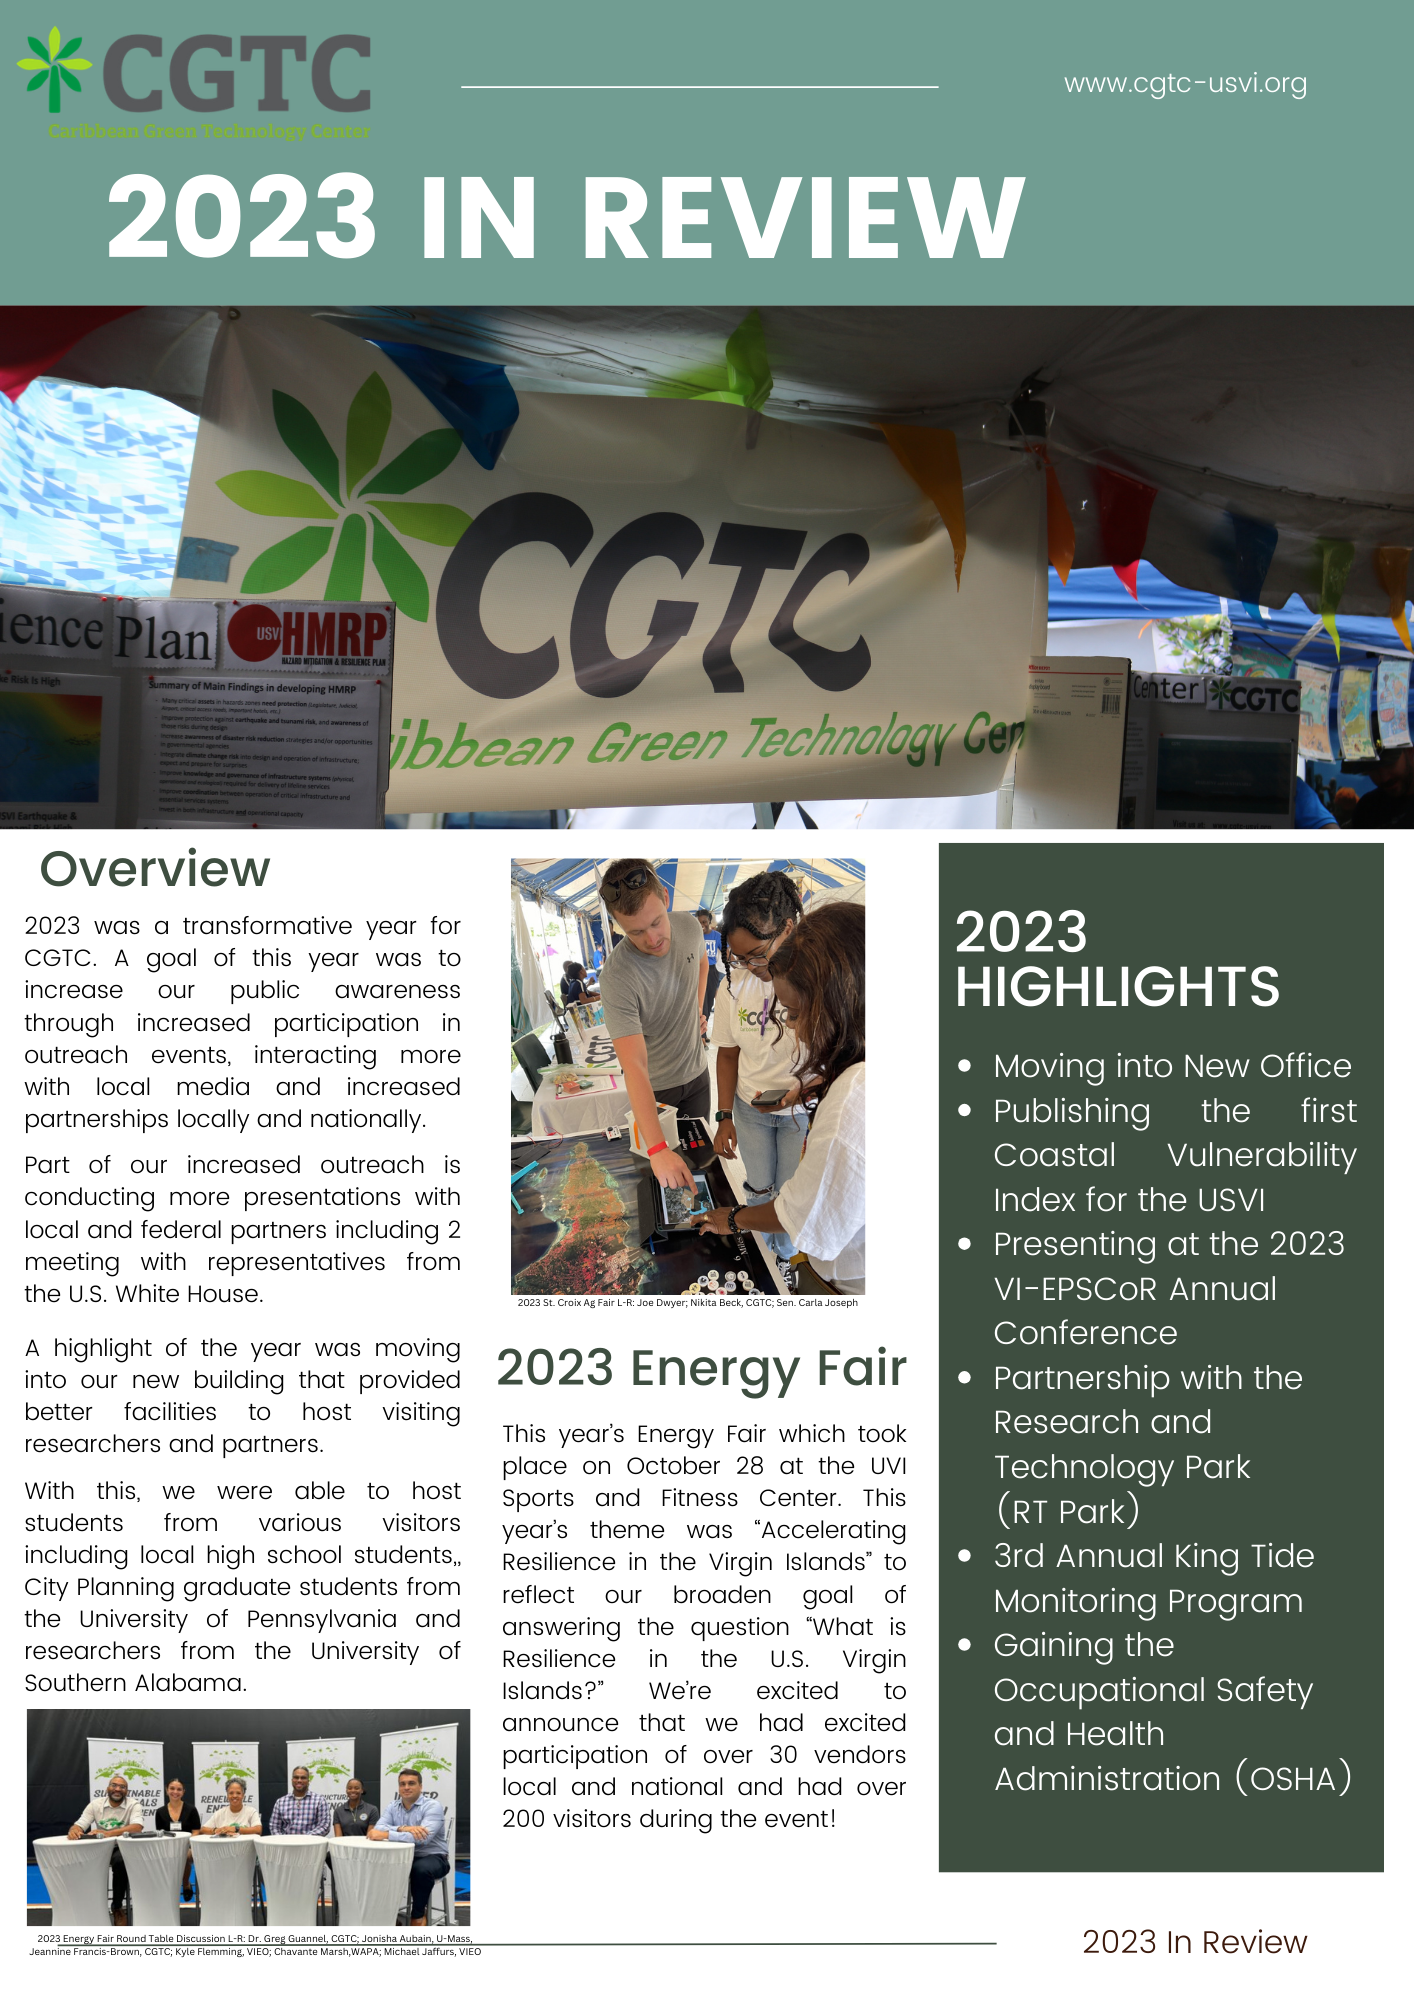 CGTC 2023 In Review